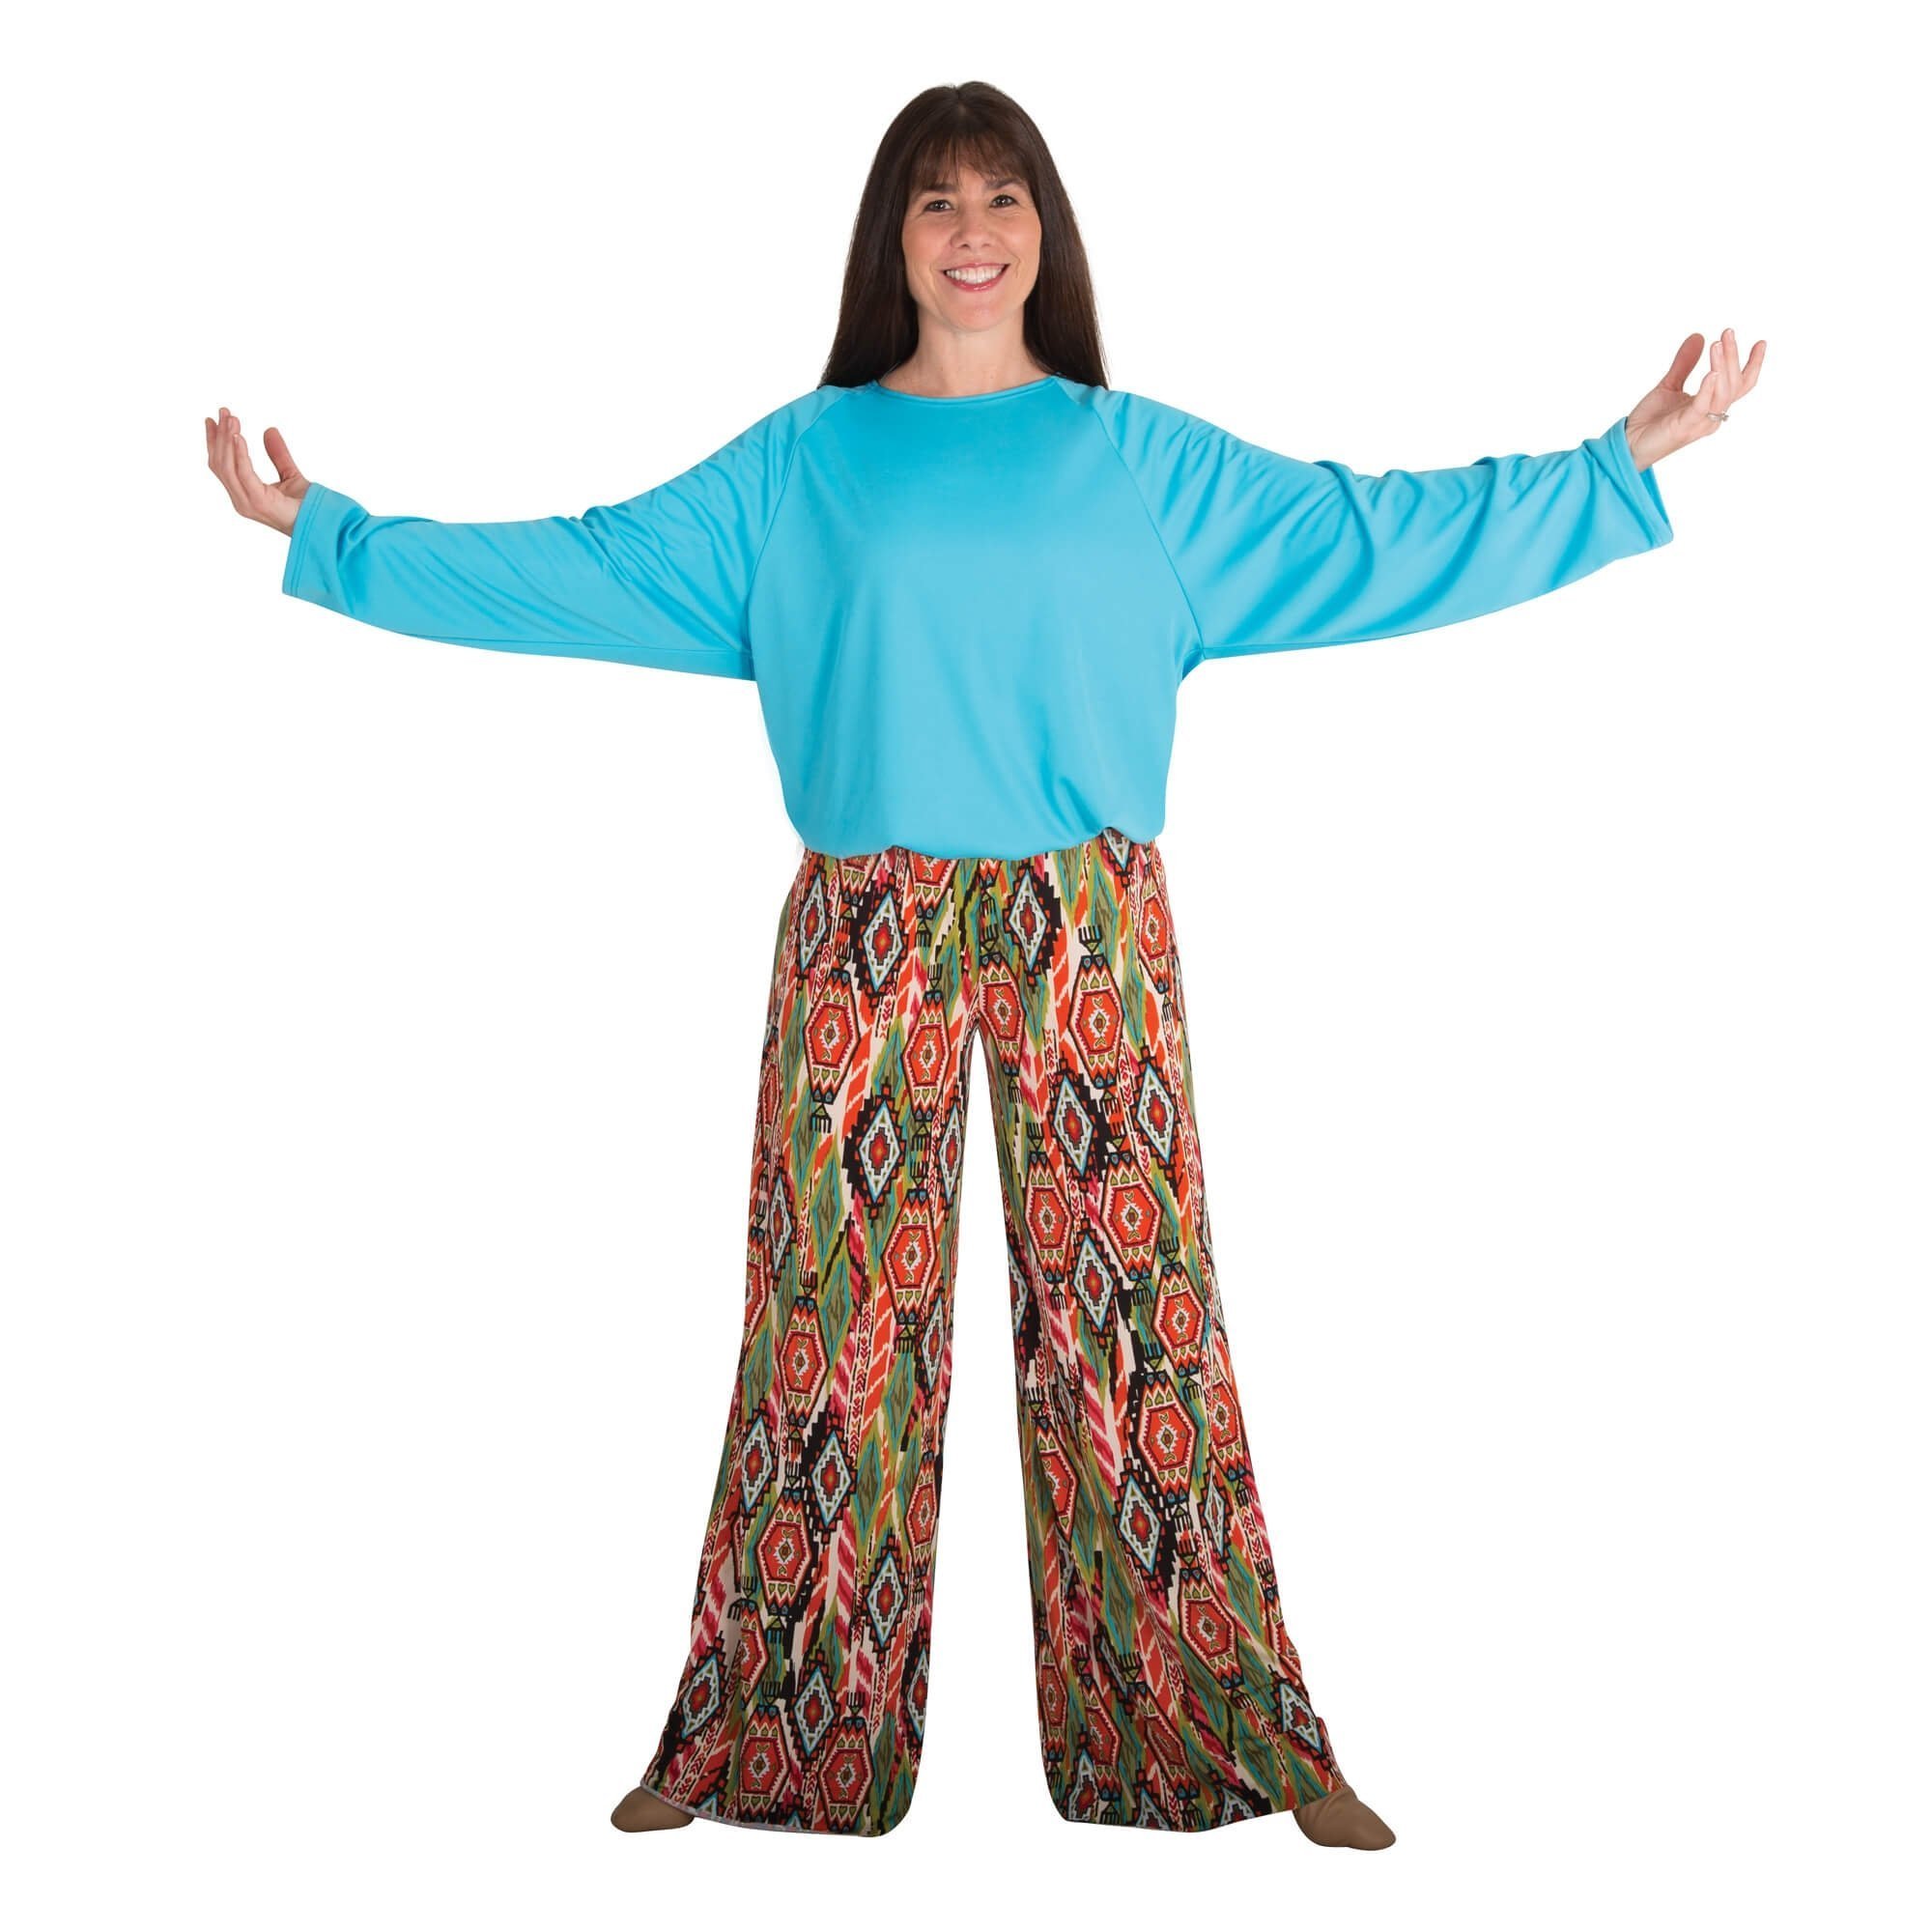 Body Wrappers 0565 Girls Praise Dance Palazzo Pants